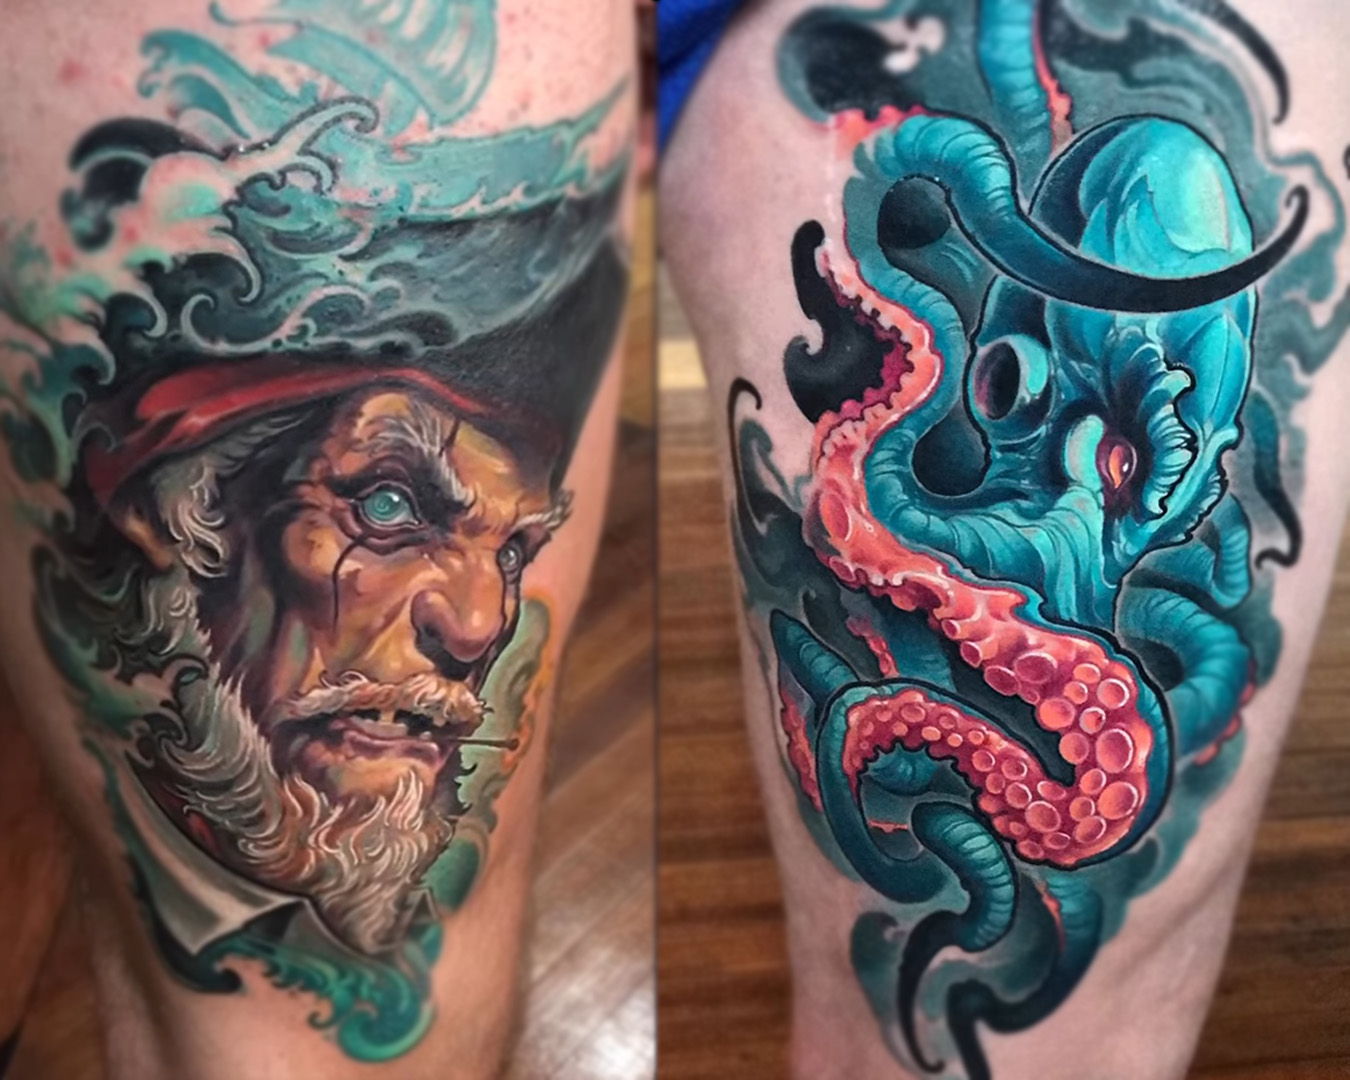 illustrative thigh tattoos of an old grizzled pirate and an gnarly aggressive blue octopus